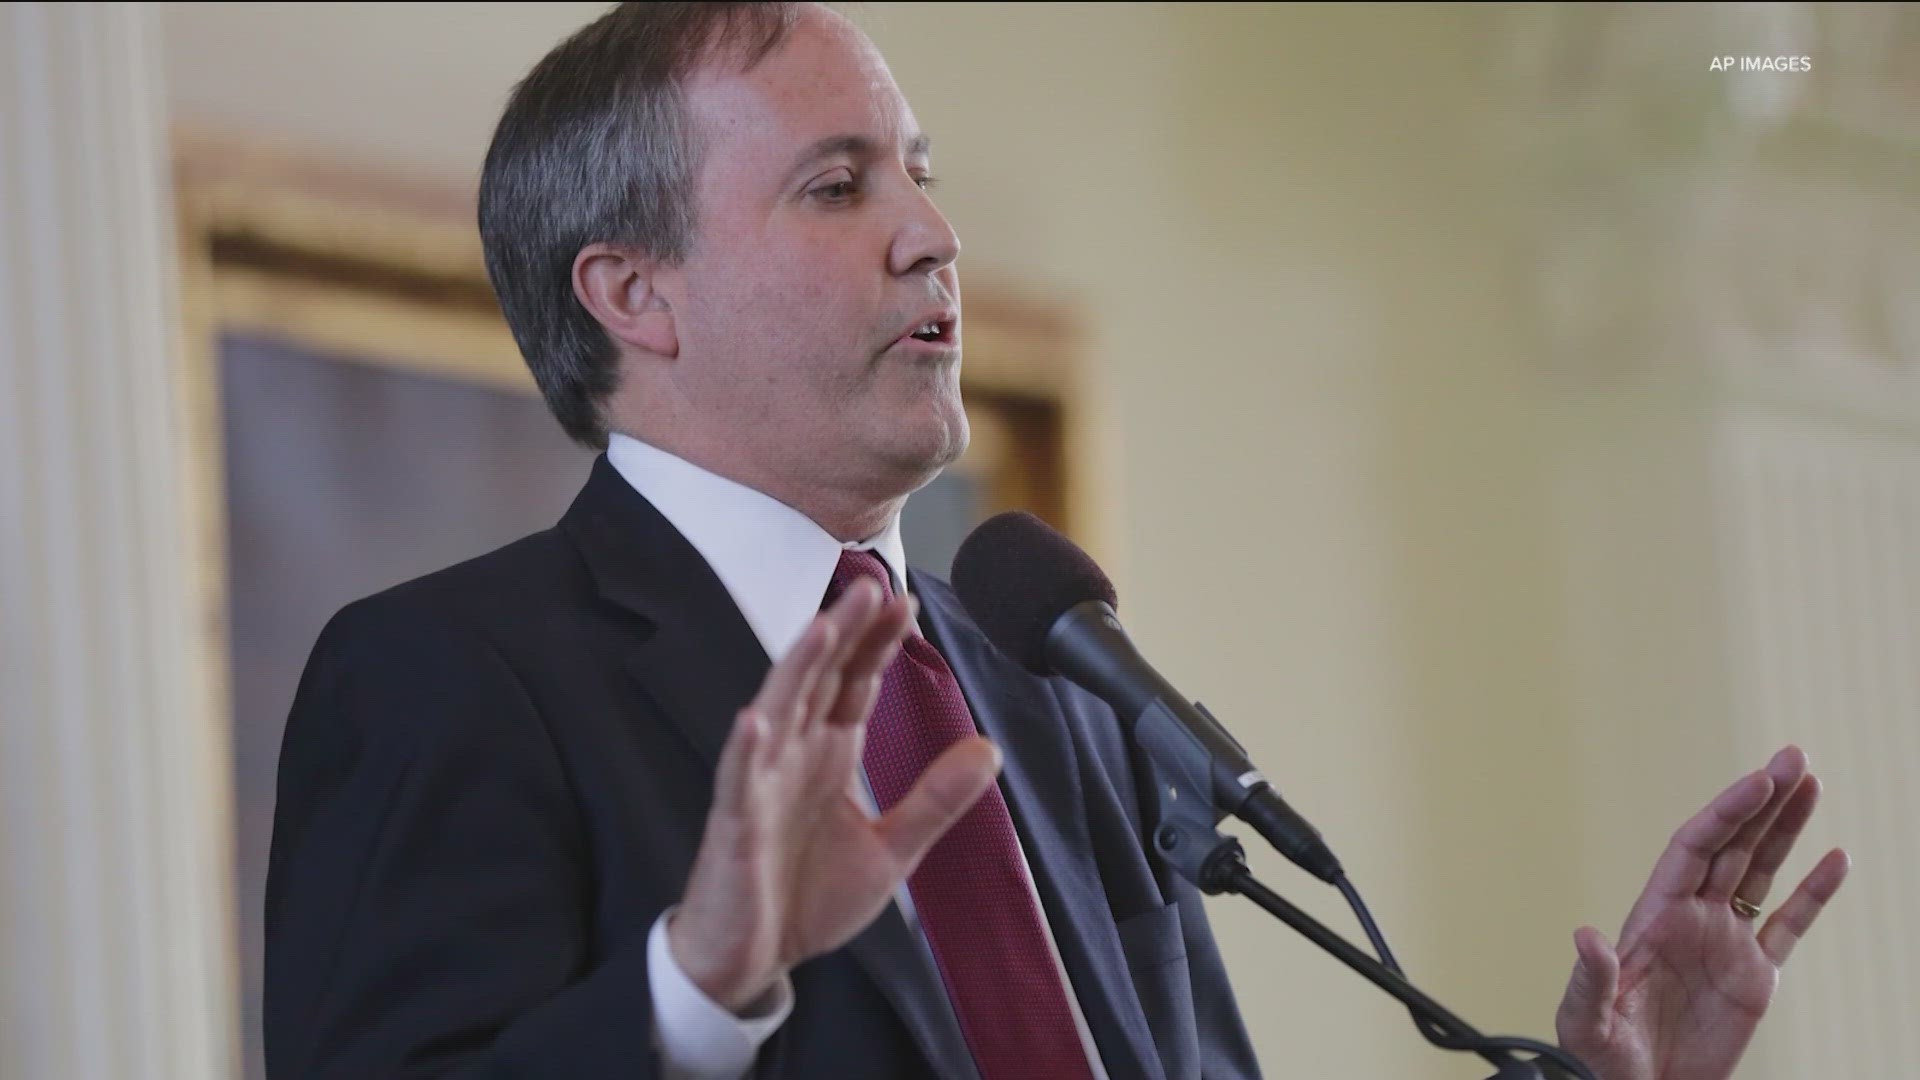 The Texas Senate agreed to start the trial against suspended Attorney General Ken Paxton on Sept. 5, and adopted rules on how the trial will unfold.